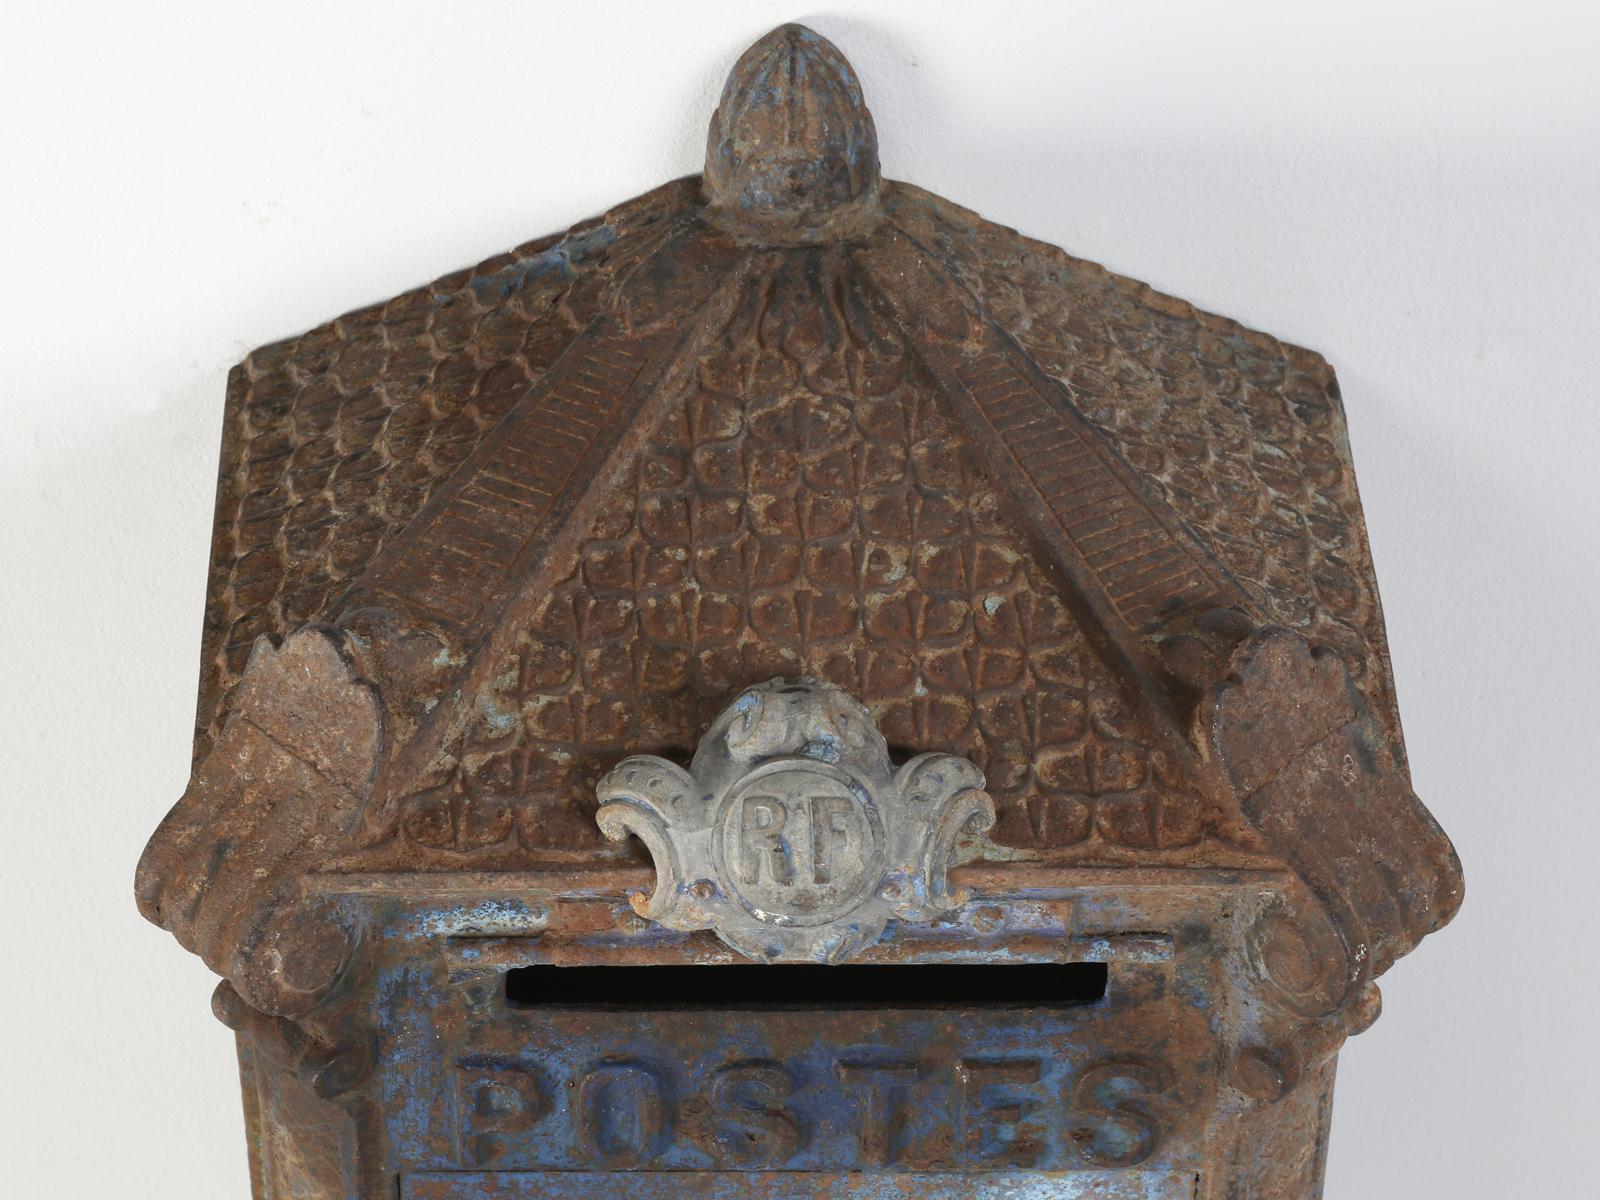 For over 25 years, we have been purchasing antique French mailboxes, from the early to mid-1900s and without exception, every time we would find a blue painted French mailbox, at some antique dealer, it was never for sale, only the yellow French